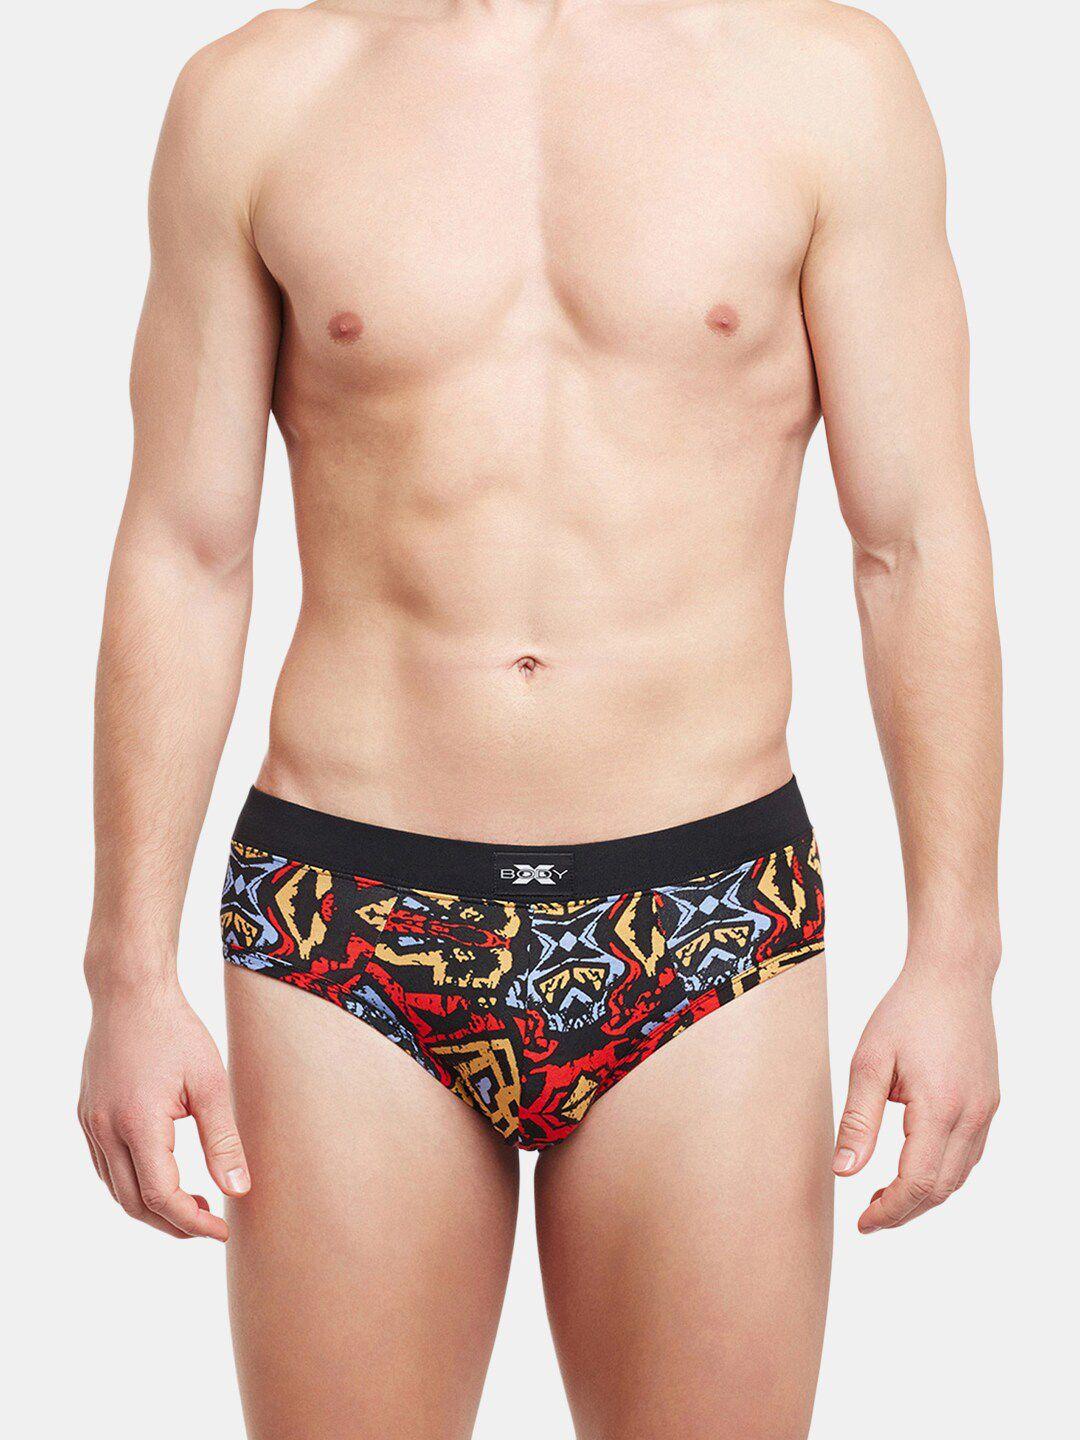 bodyx men abstract printed low-rise hipster brief bx06b-multi-print-s